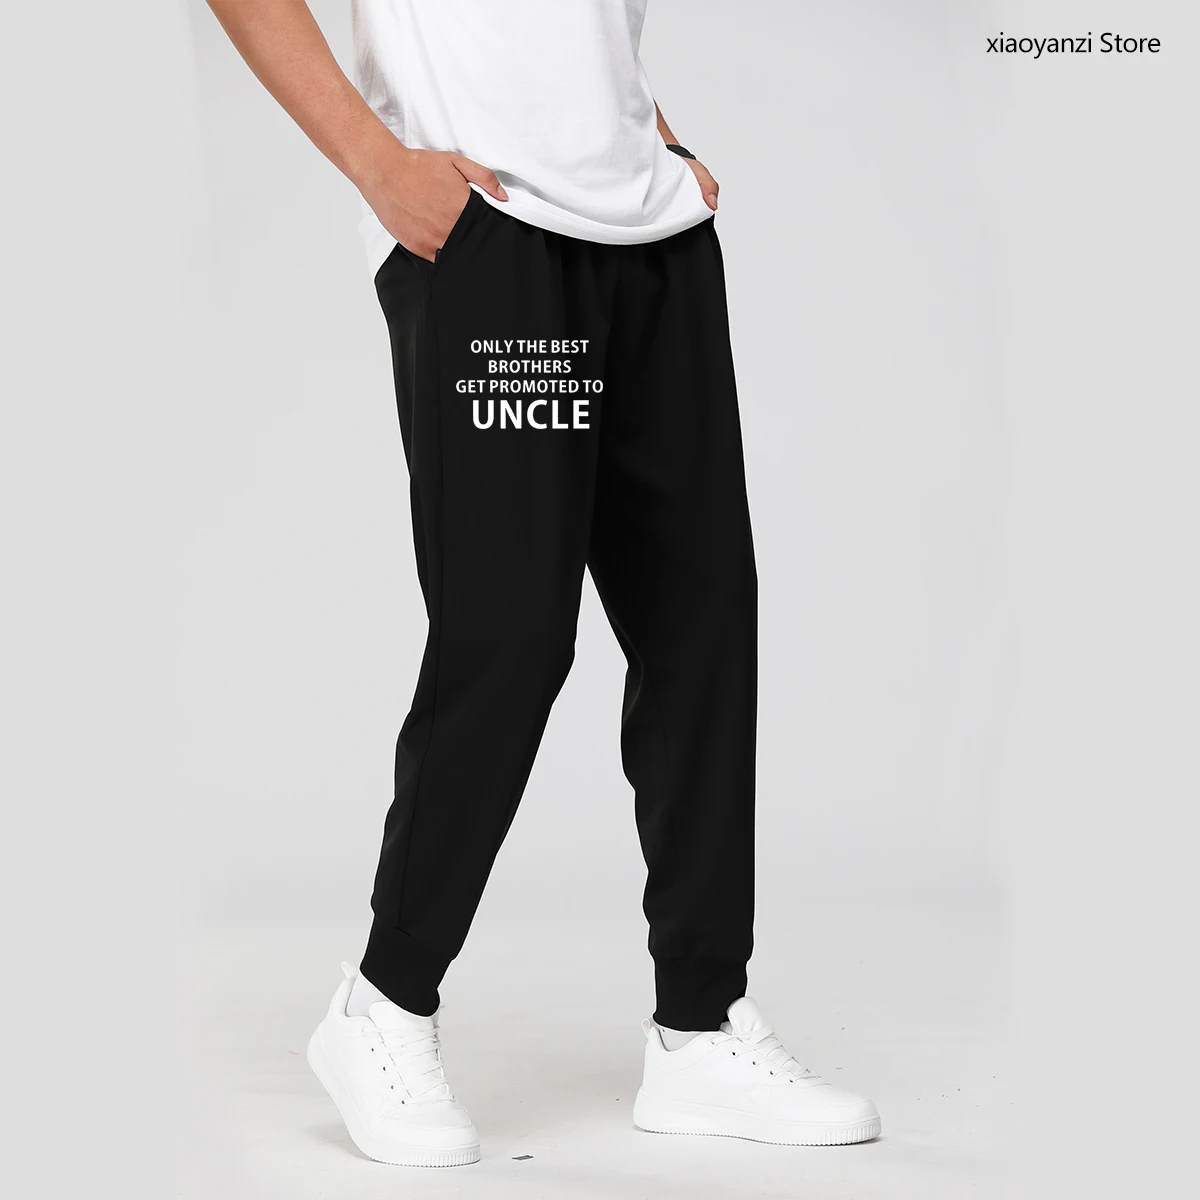 

New Spring Autumn Style Only The Best Brothers Get Promoted To Uncle Sweatpants Funny Men Sports Long Pants EU Size Trousers